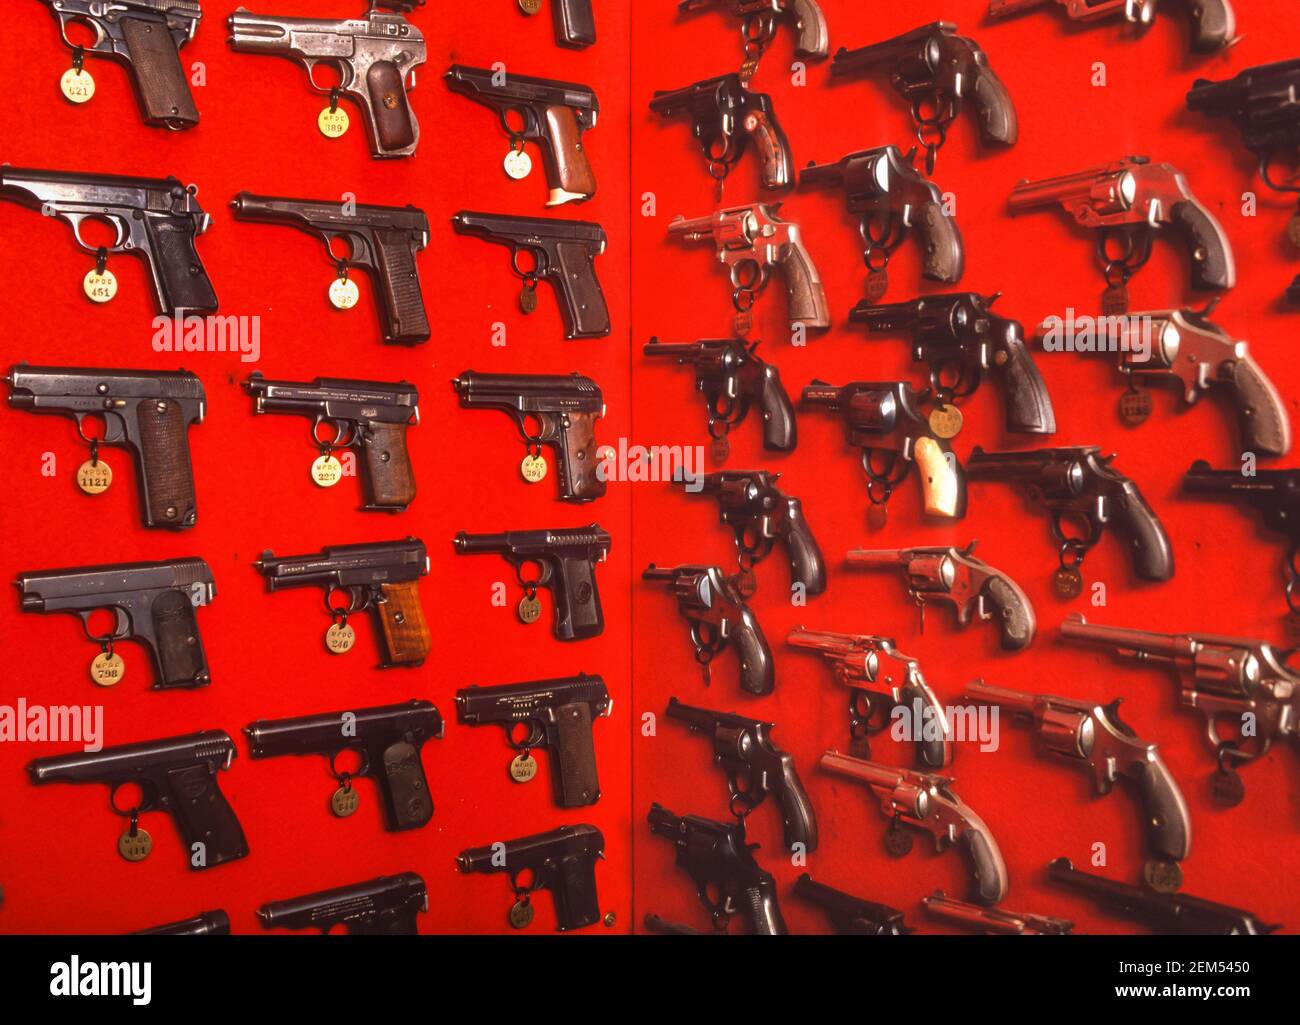 WASHINGTON, DC, USA - Display of handguns, confiscated off streets by DC's Metropolitan Police Department, MPD. Stock Photo